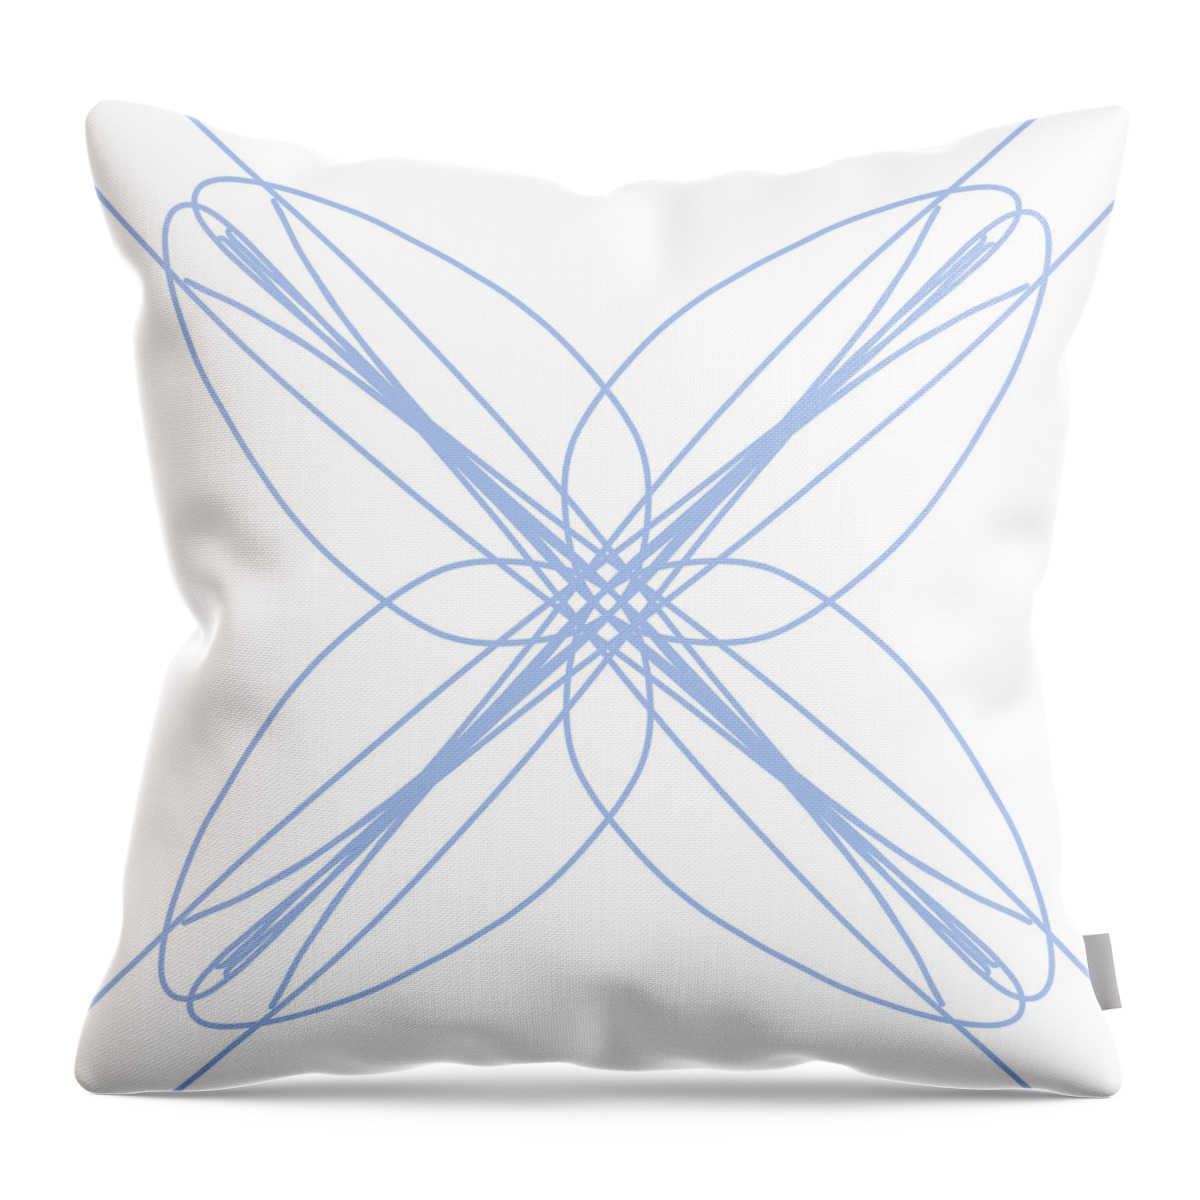 Blue Lines Throw Pillow featuring the digital art Geometrical Pattern - Christmas Flower by Patricia Awapara